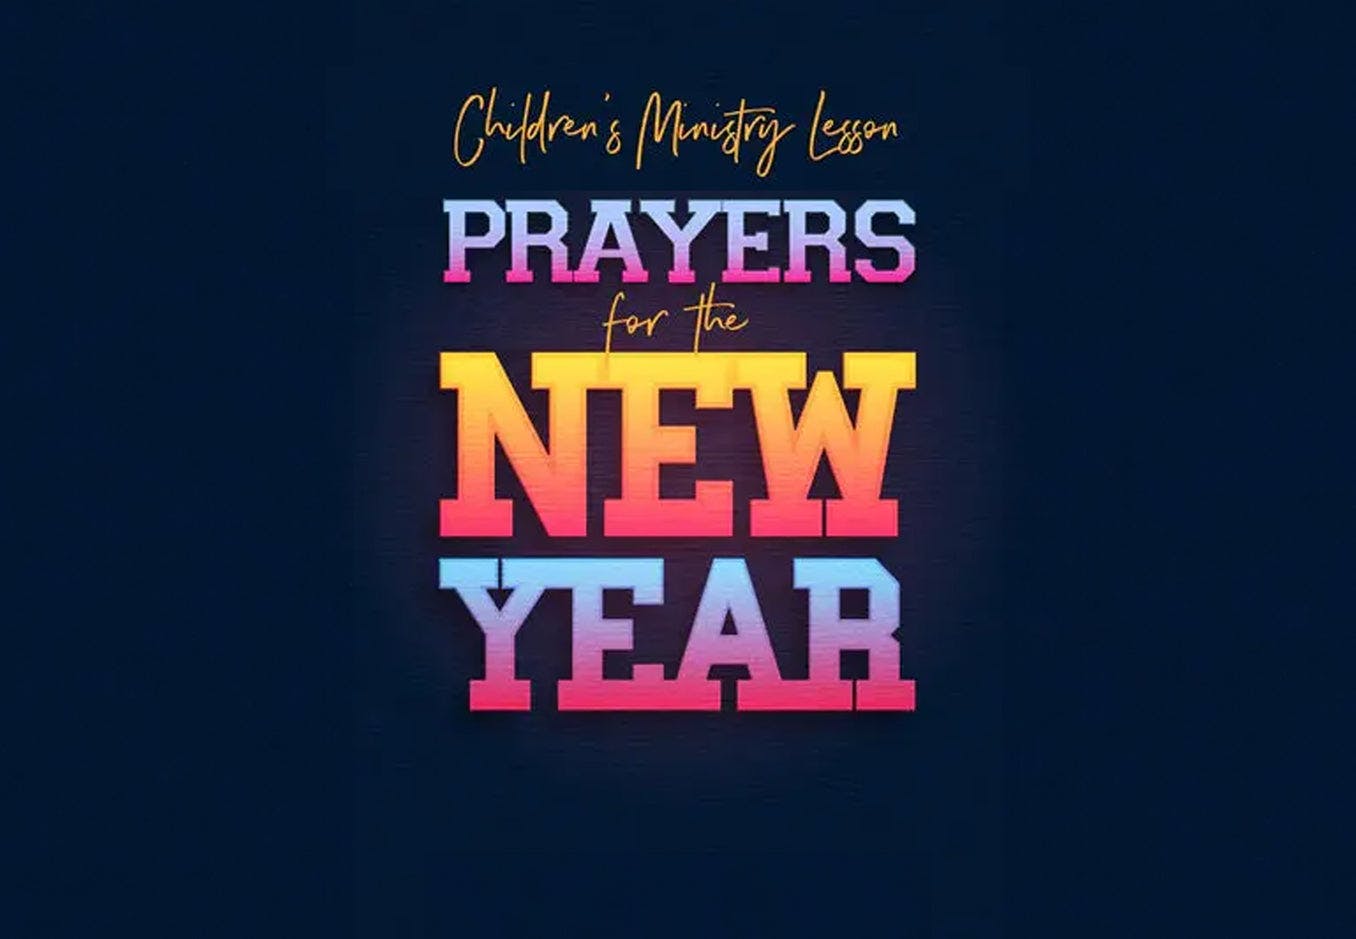 Prayers for the New Year Lesson